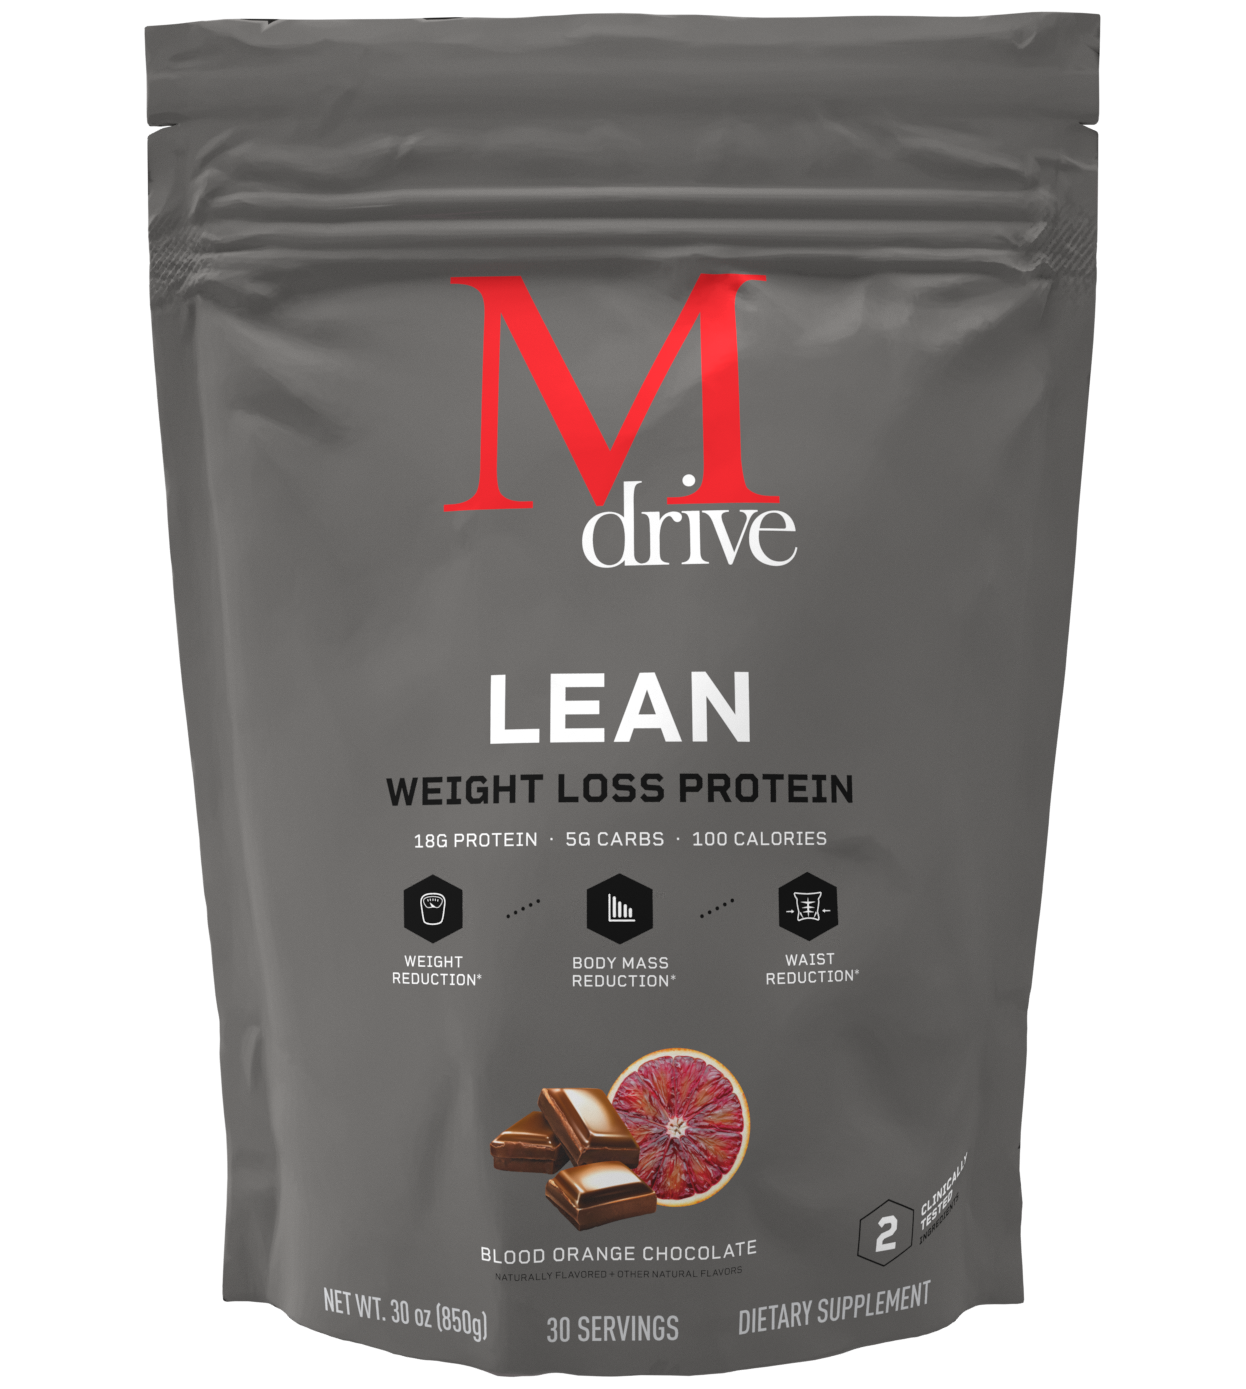 Mdrive Lean Weight Loss Protein